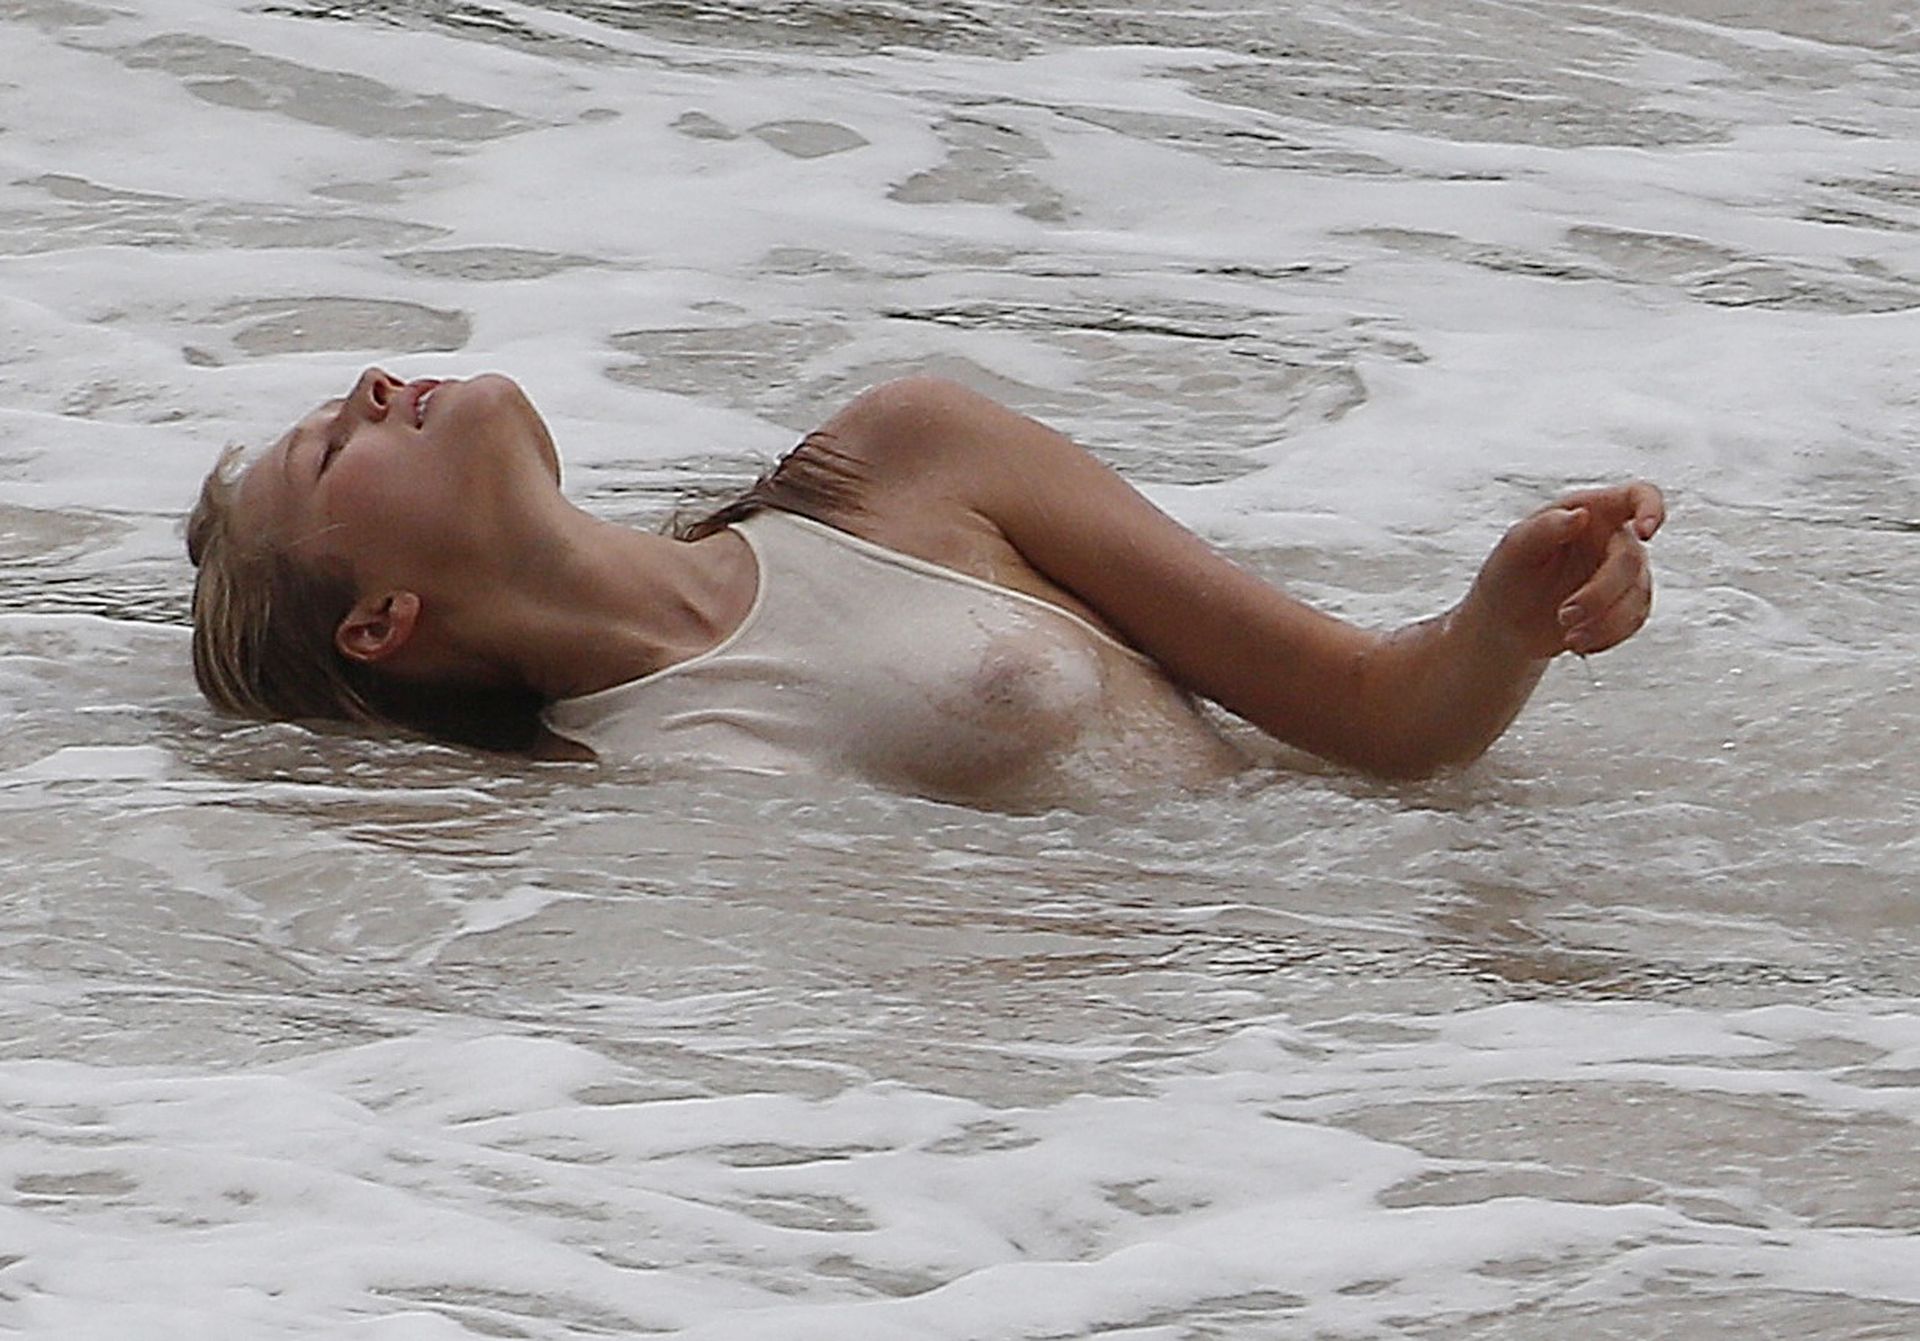 Toni Garrn Shows Her Tits in a Wet Top (9 Photos)